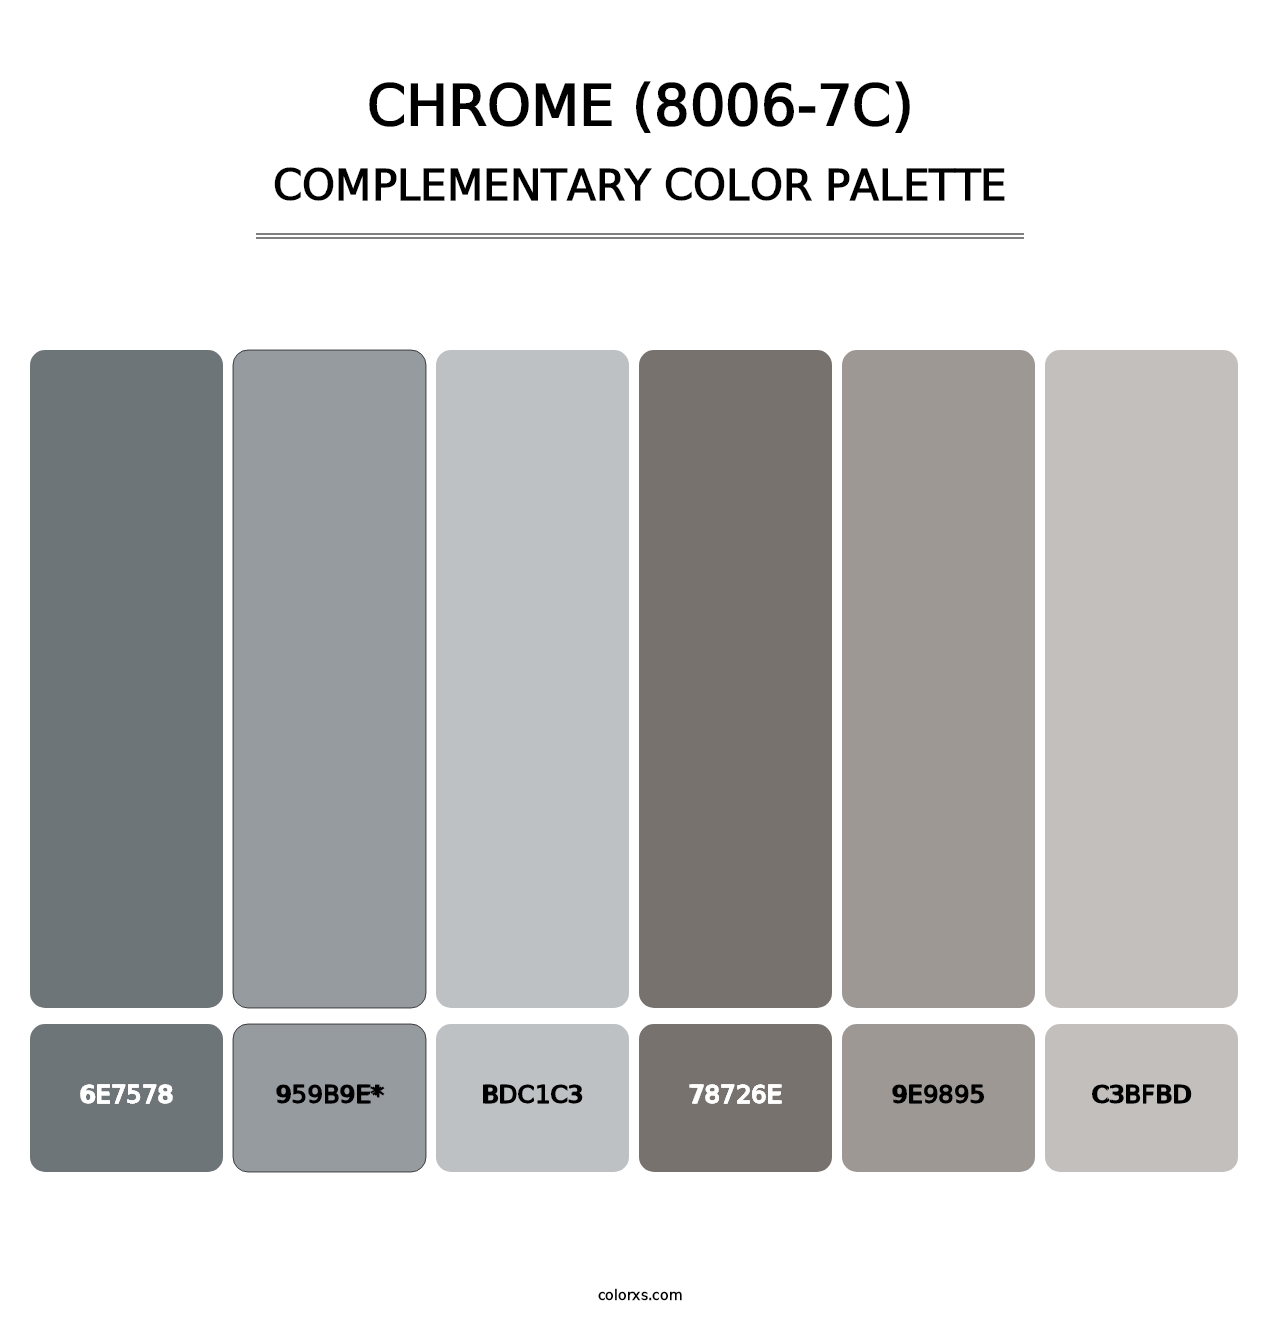 Chrome (8006-7C) - Complementary Color Palette